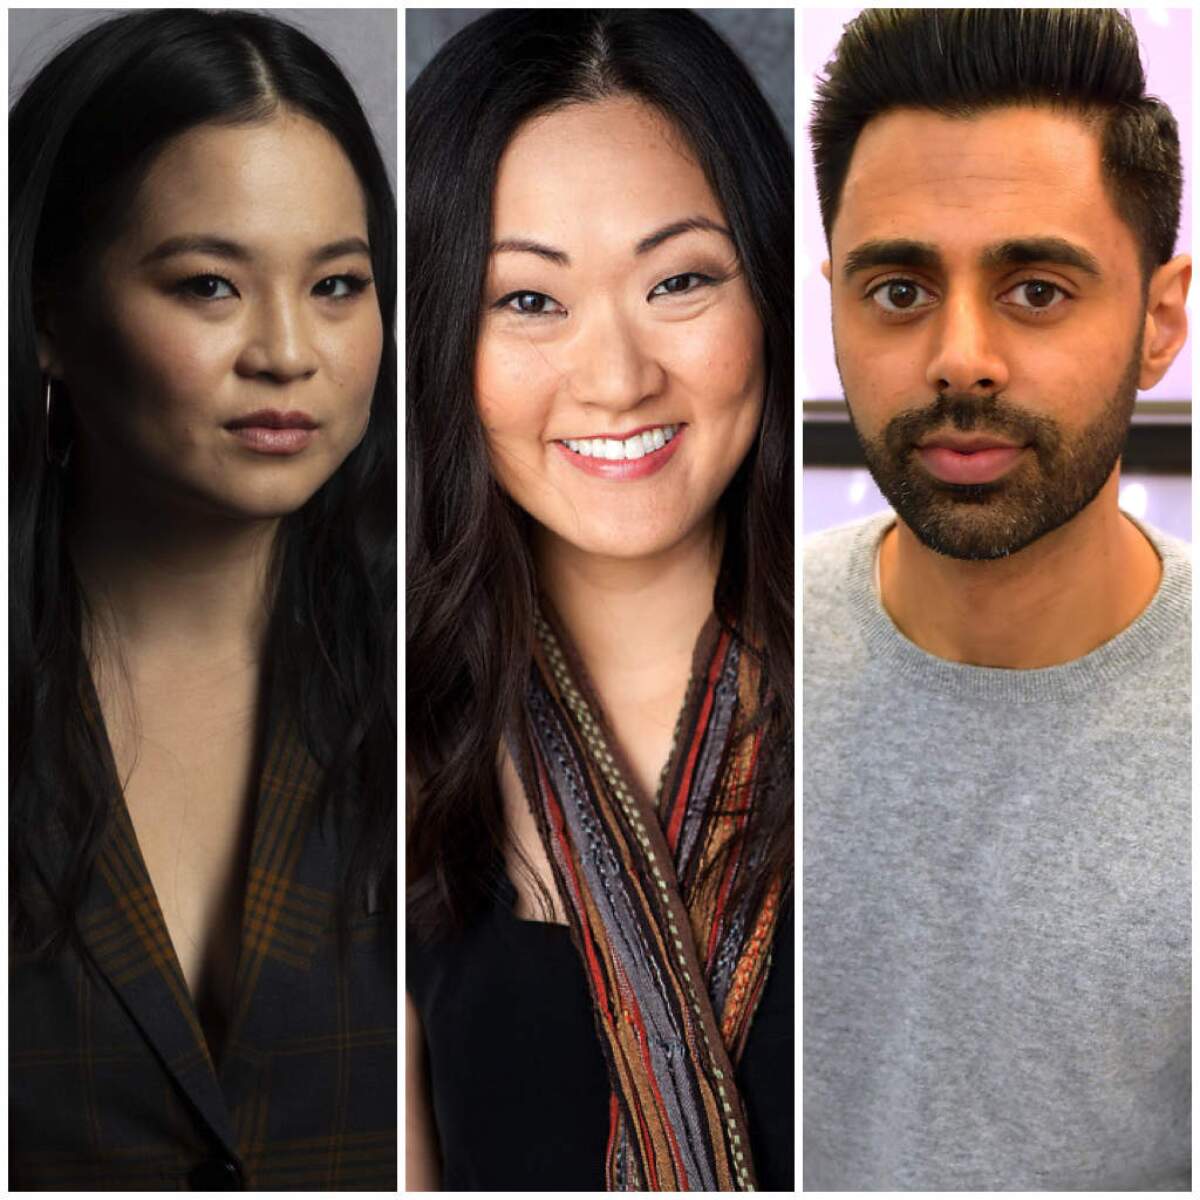 A triptych of actors Kelly Marie Tran, Jully Lee and Hasan Minhaj.